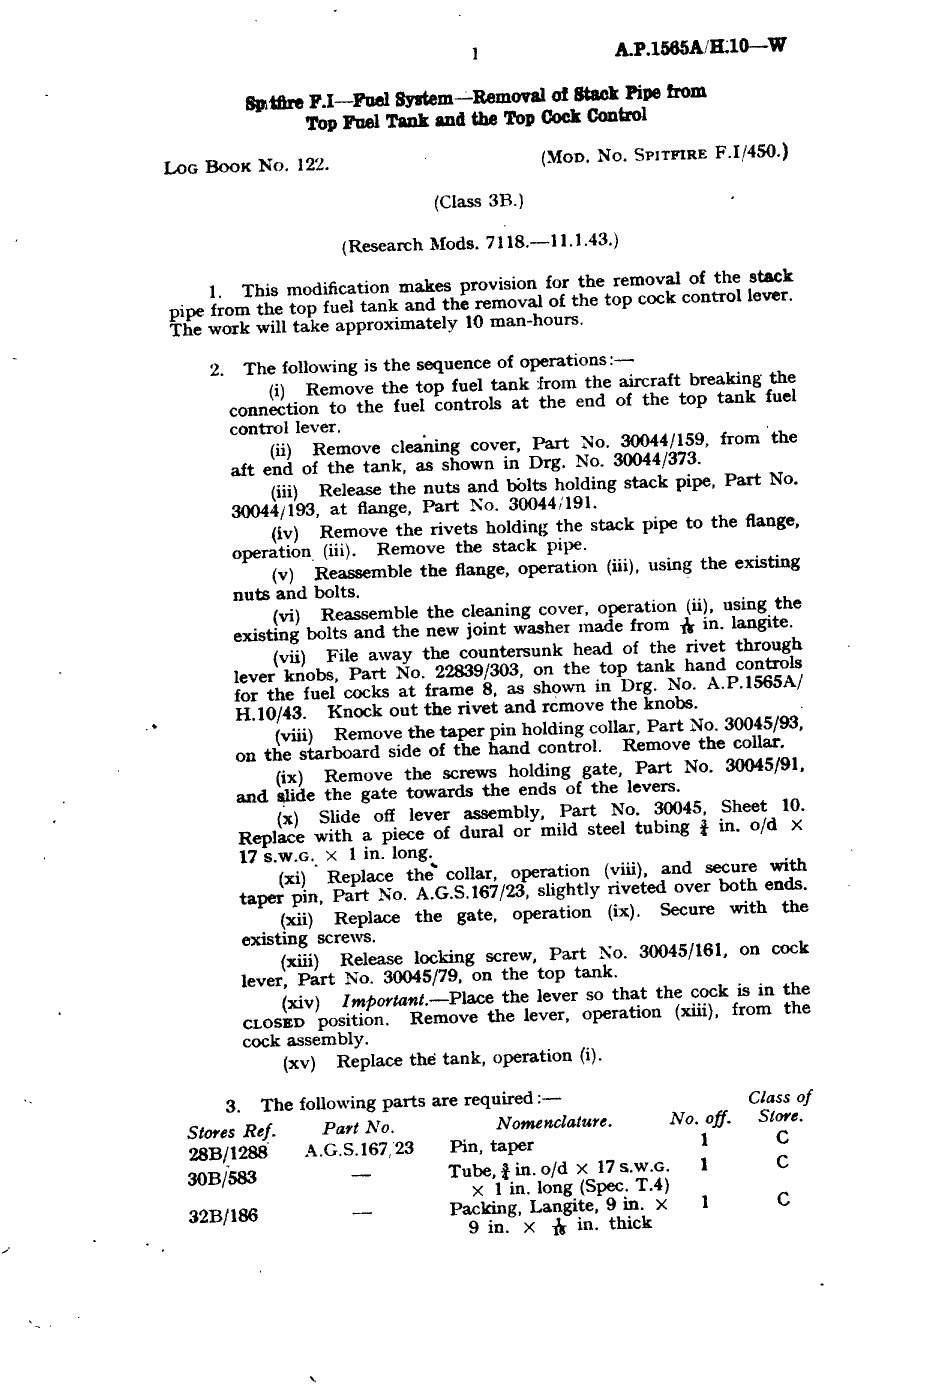 Sample page 1 from AirCorps Library document: Spitfire F.I, Fuel System Removal of Stack Pipe from Top Fuel Tank and the Top Cock Control